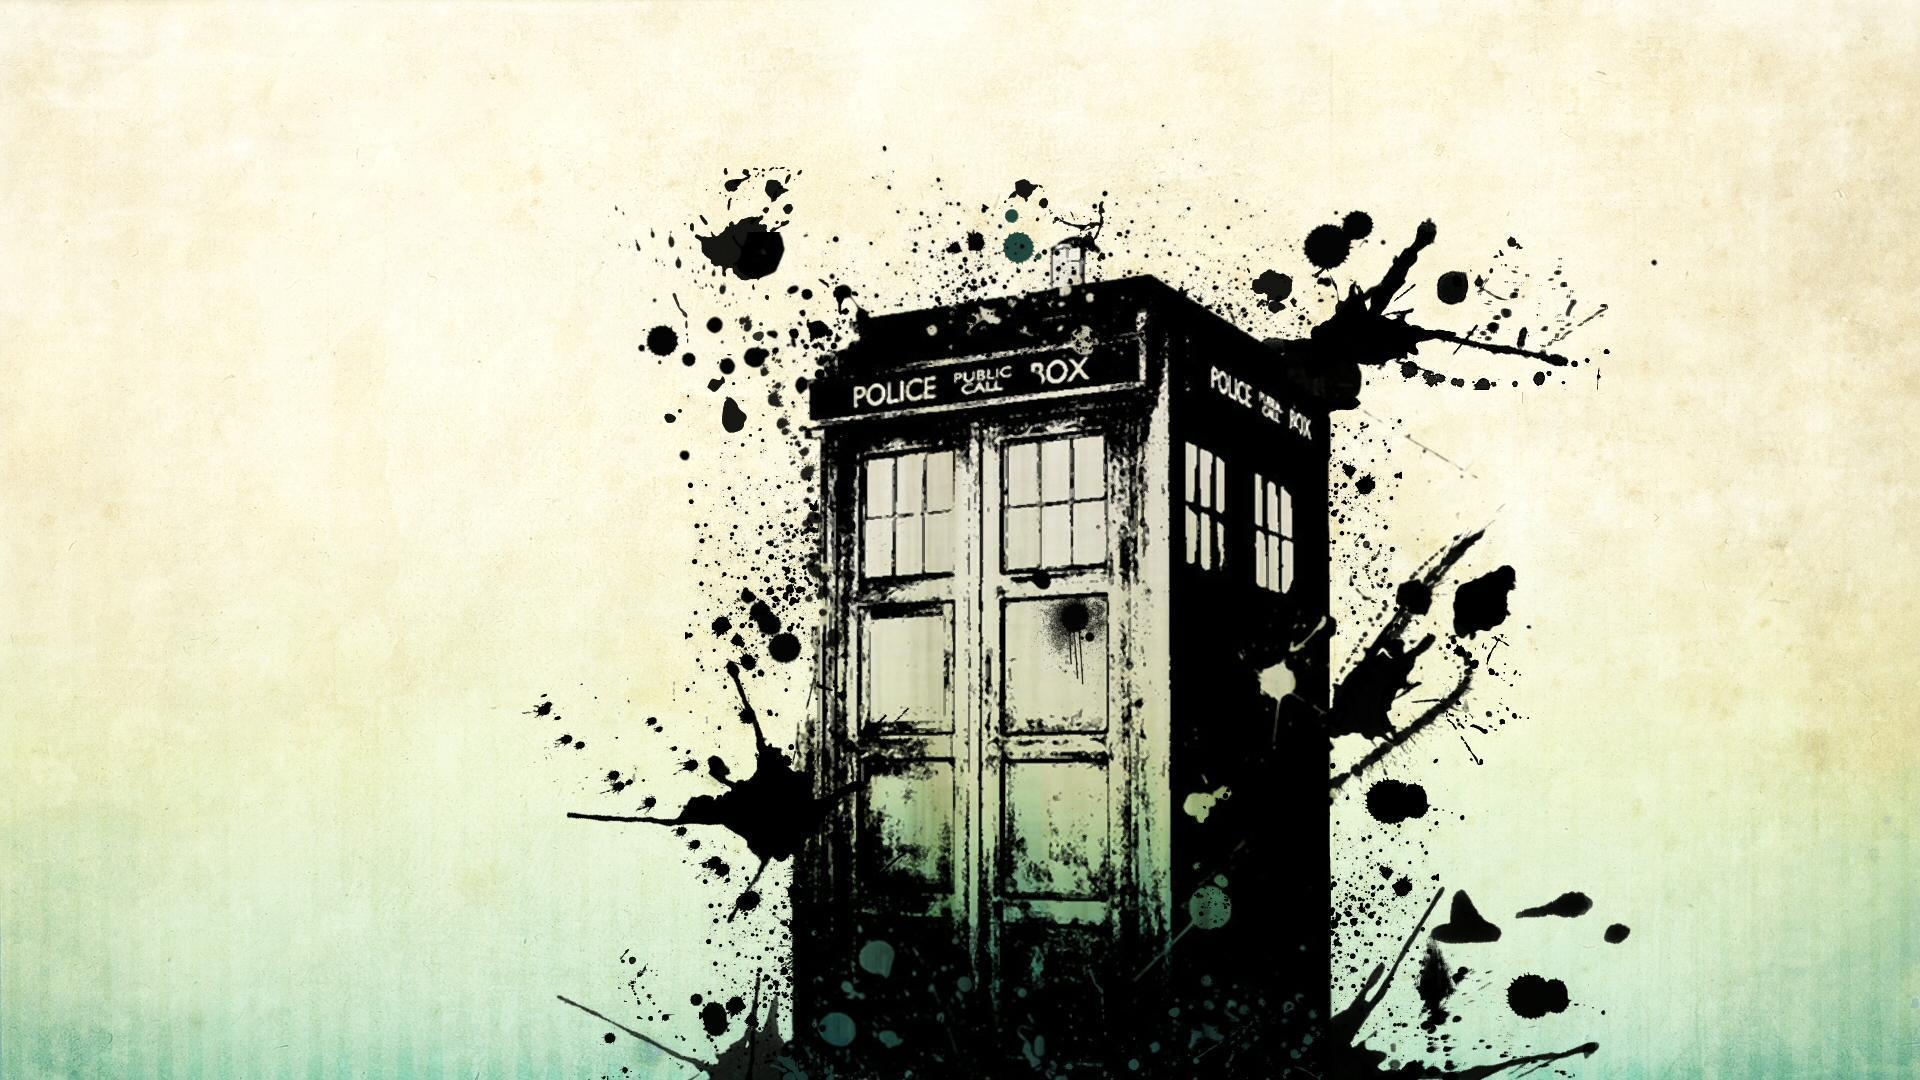 doctor wallpaper 5 - Image And Wallpaper free to download